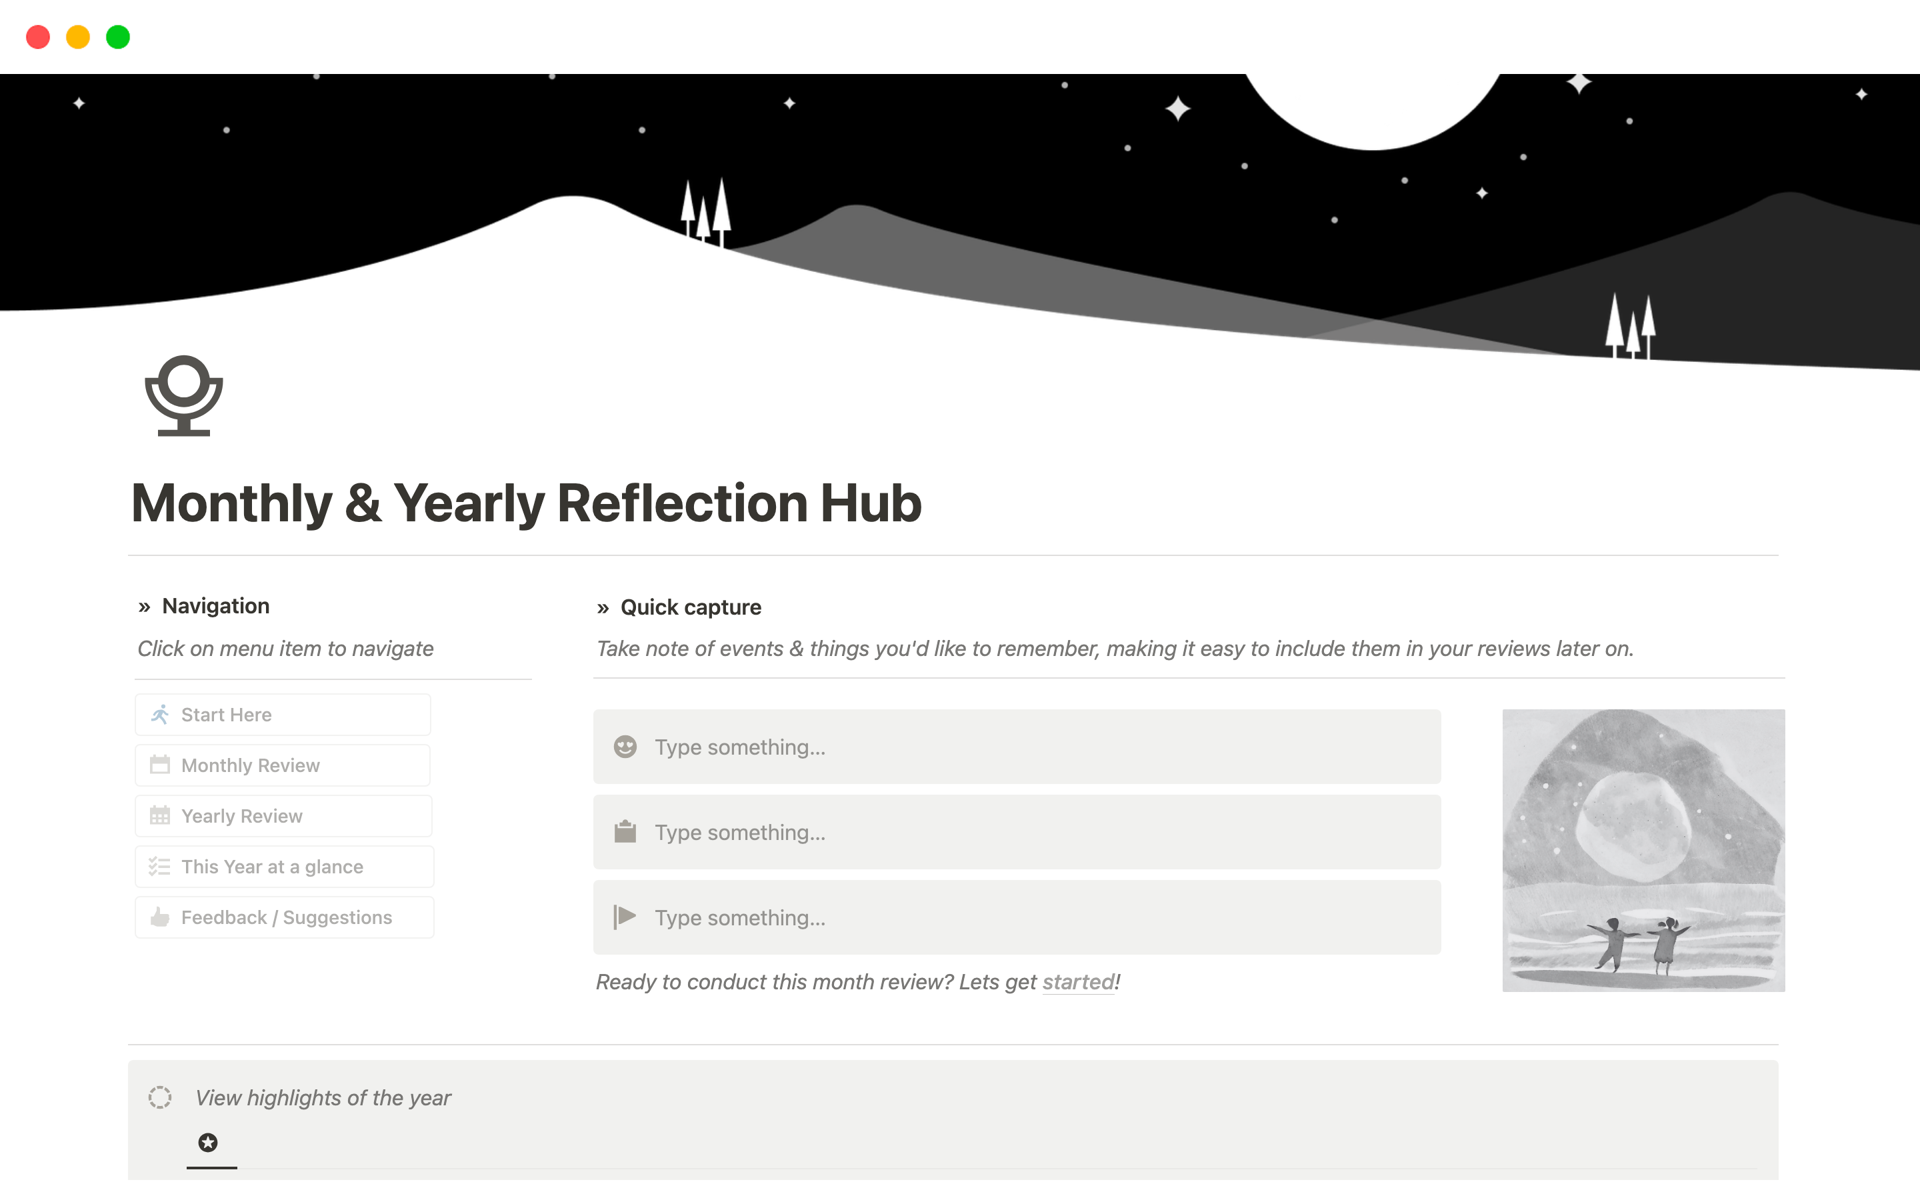 Supercharge your personal introspection journey with our Monthly and Yearly Reflection Hub Notion template! 🚀